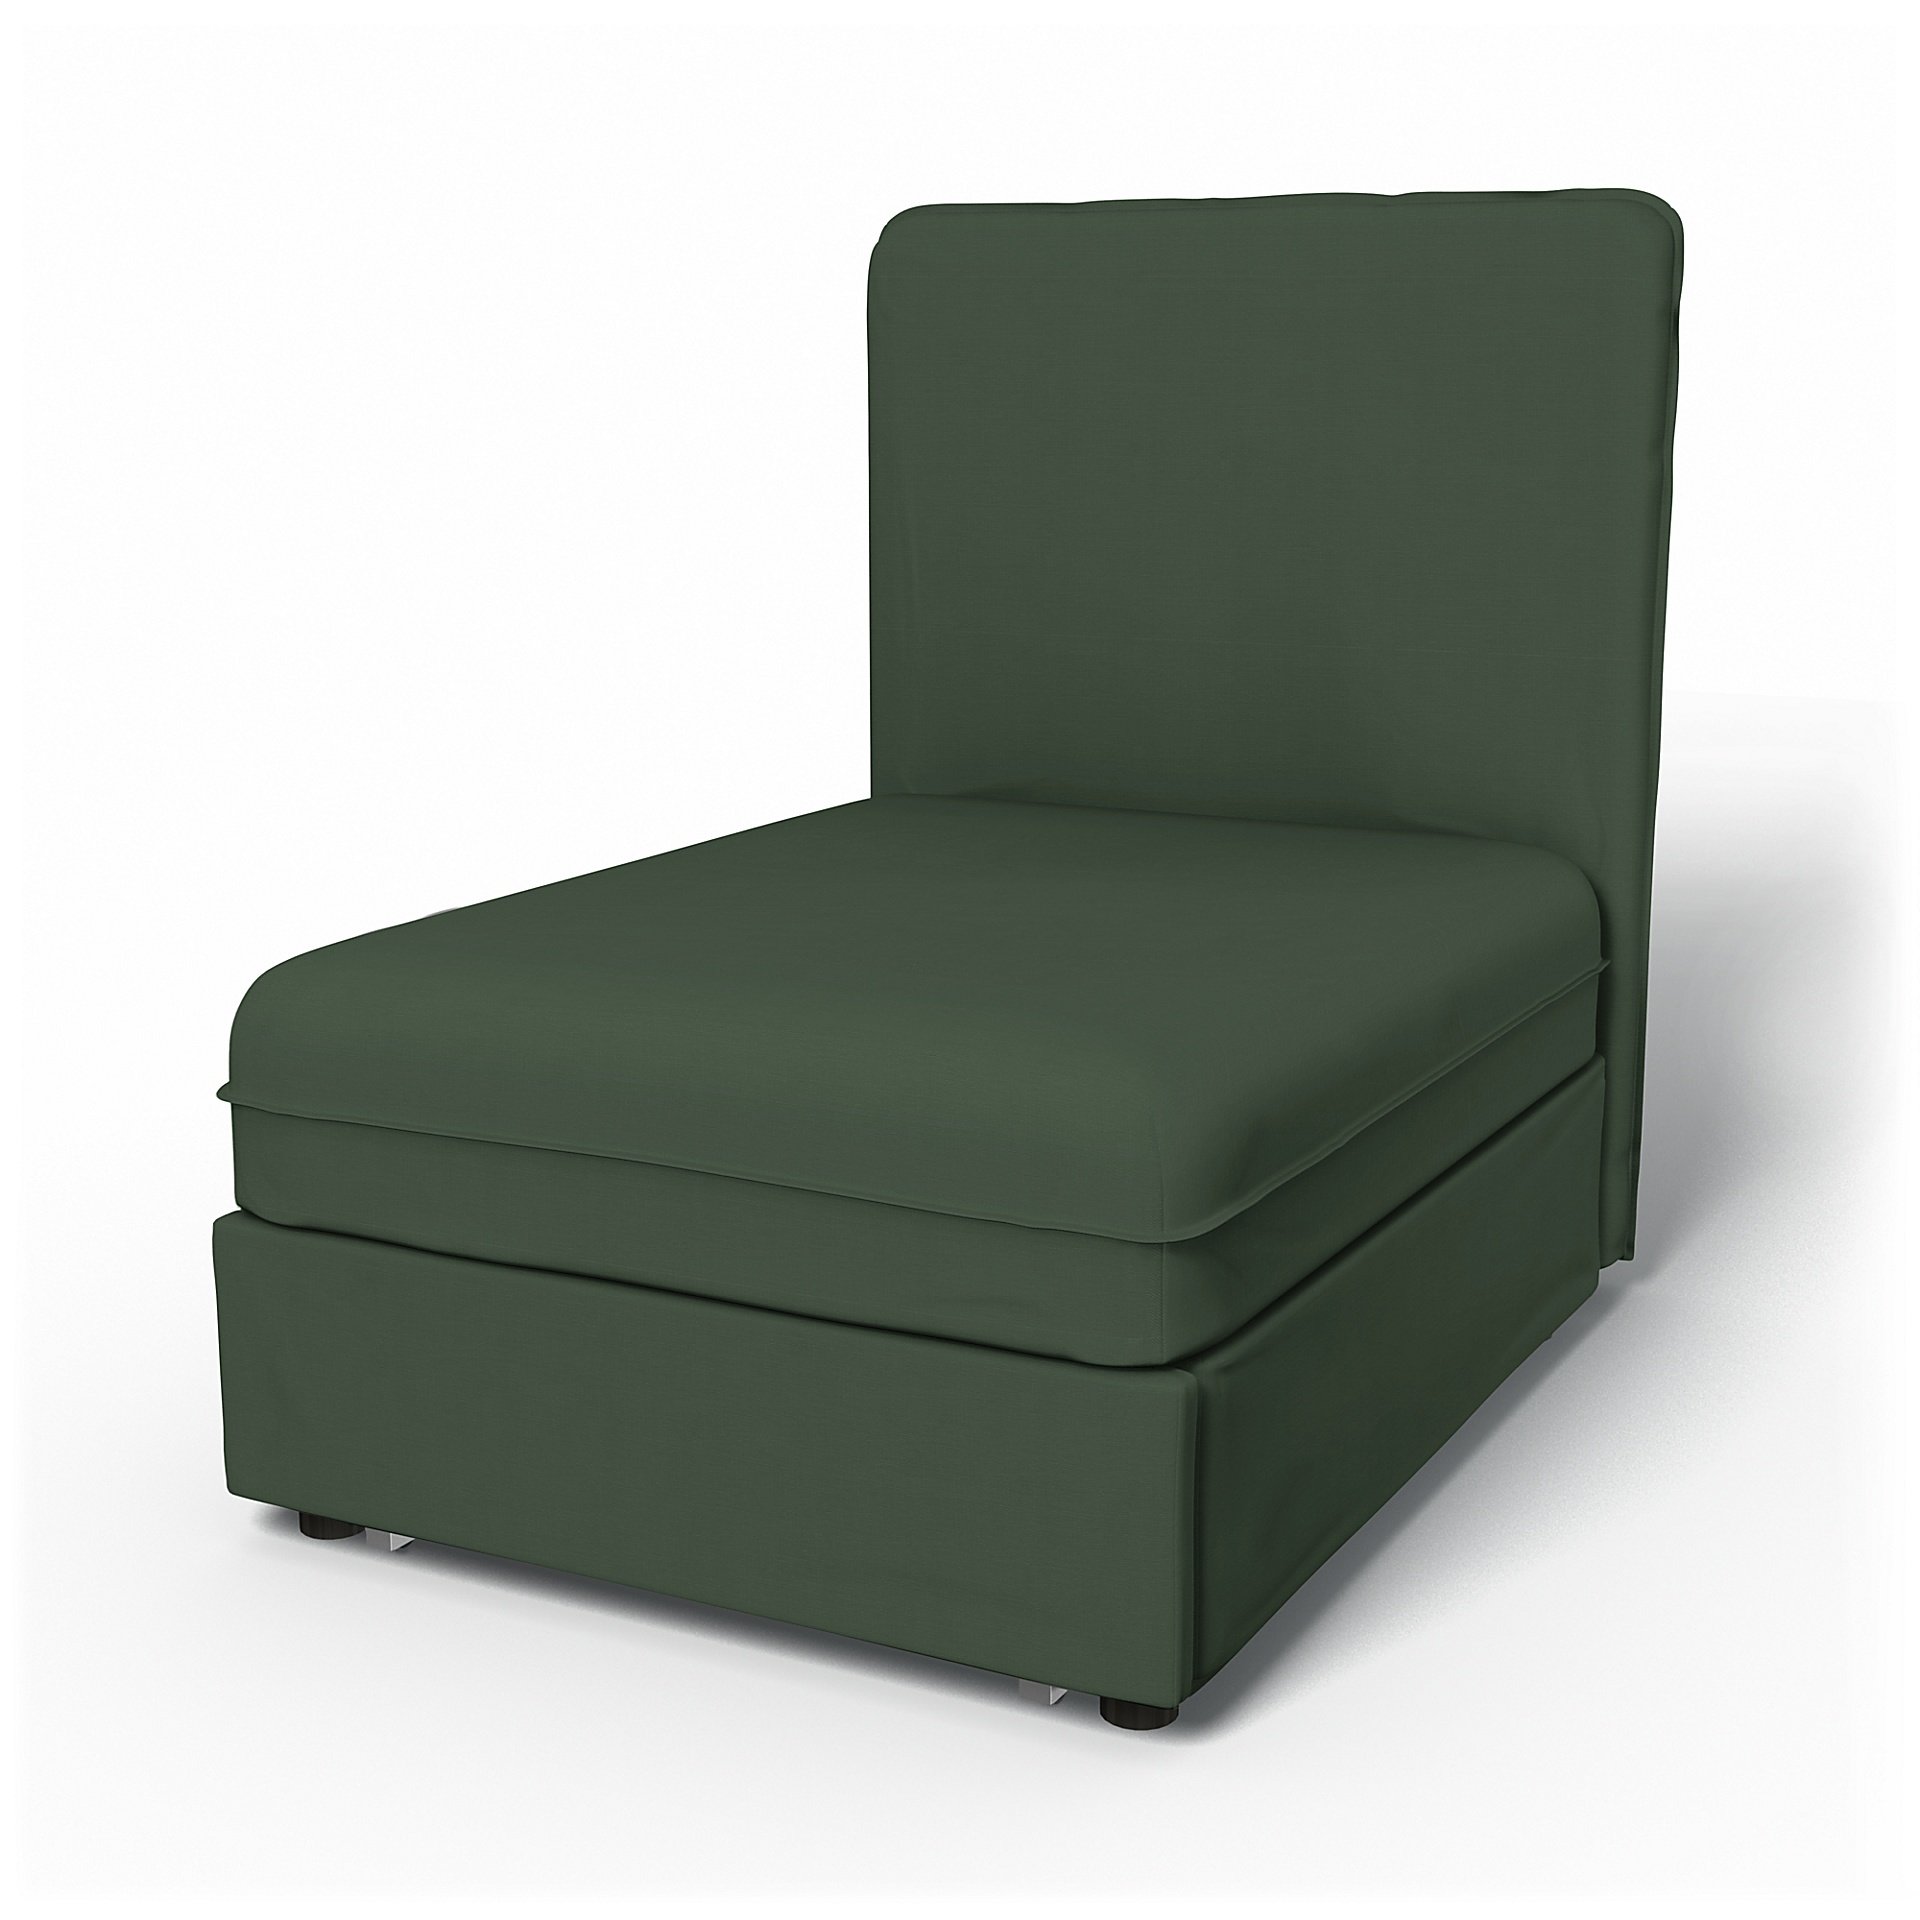 IKEA - Vallentuna Seat Module with High Back Sofa Bed Cover (80x100x46cm), Thyme, Cotton - Bemz